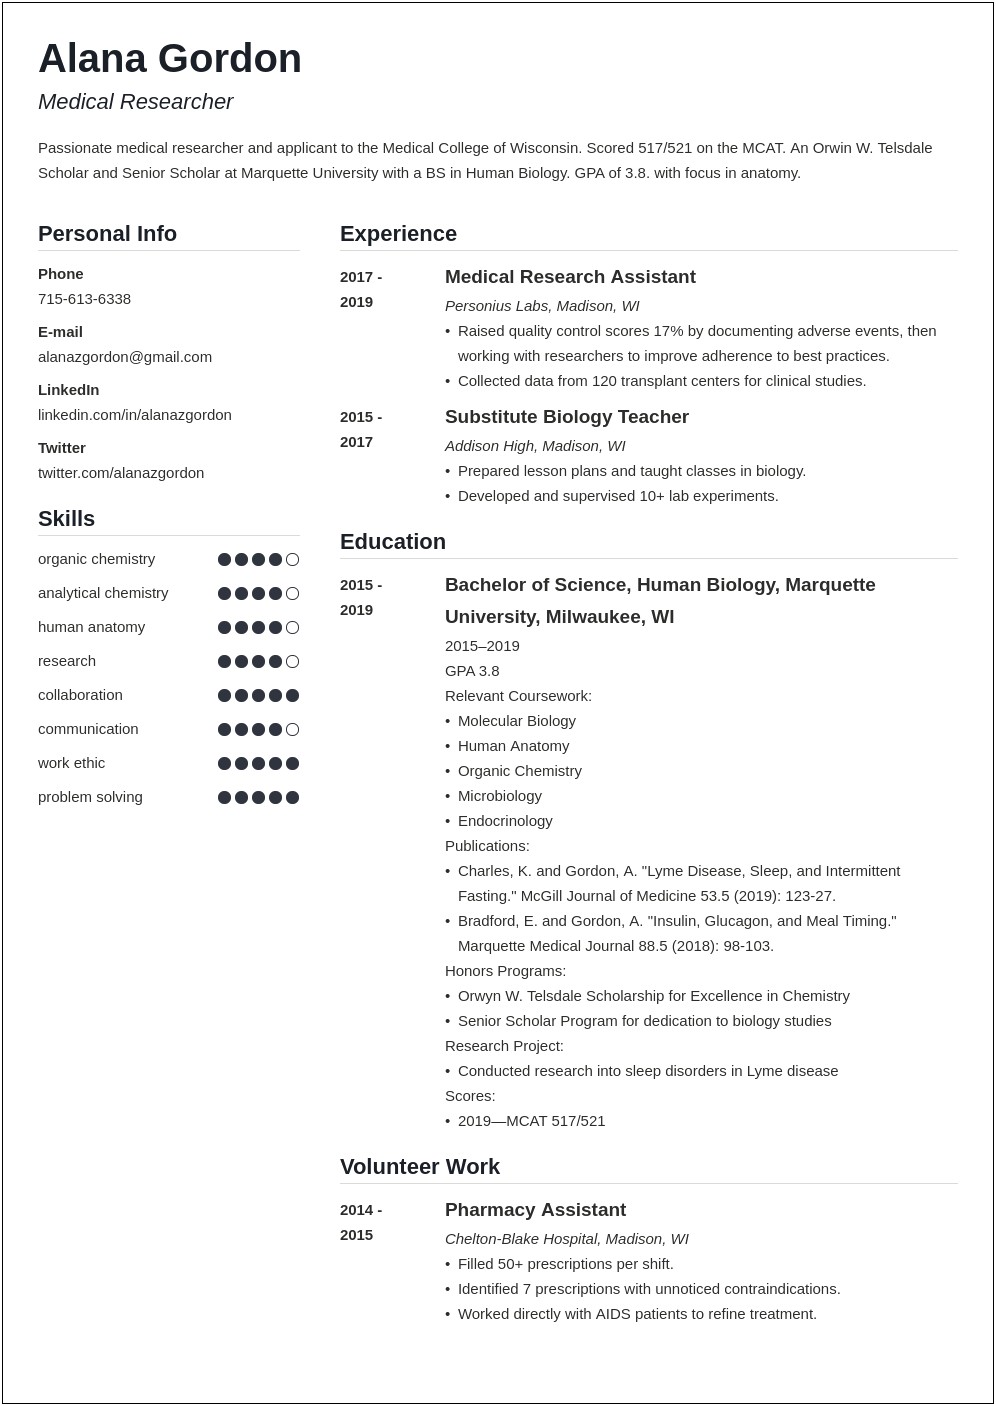 Adding Shadowing Experience To Med School Resume